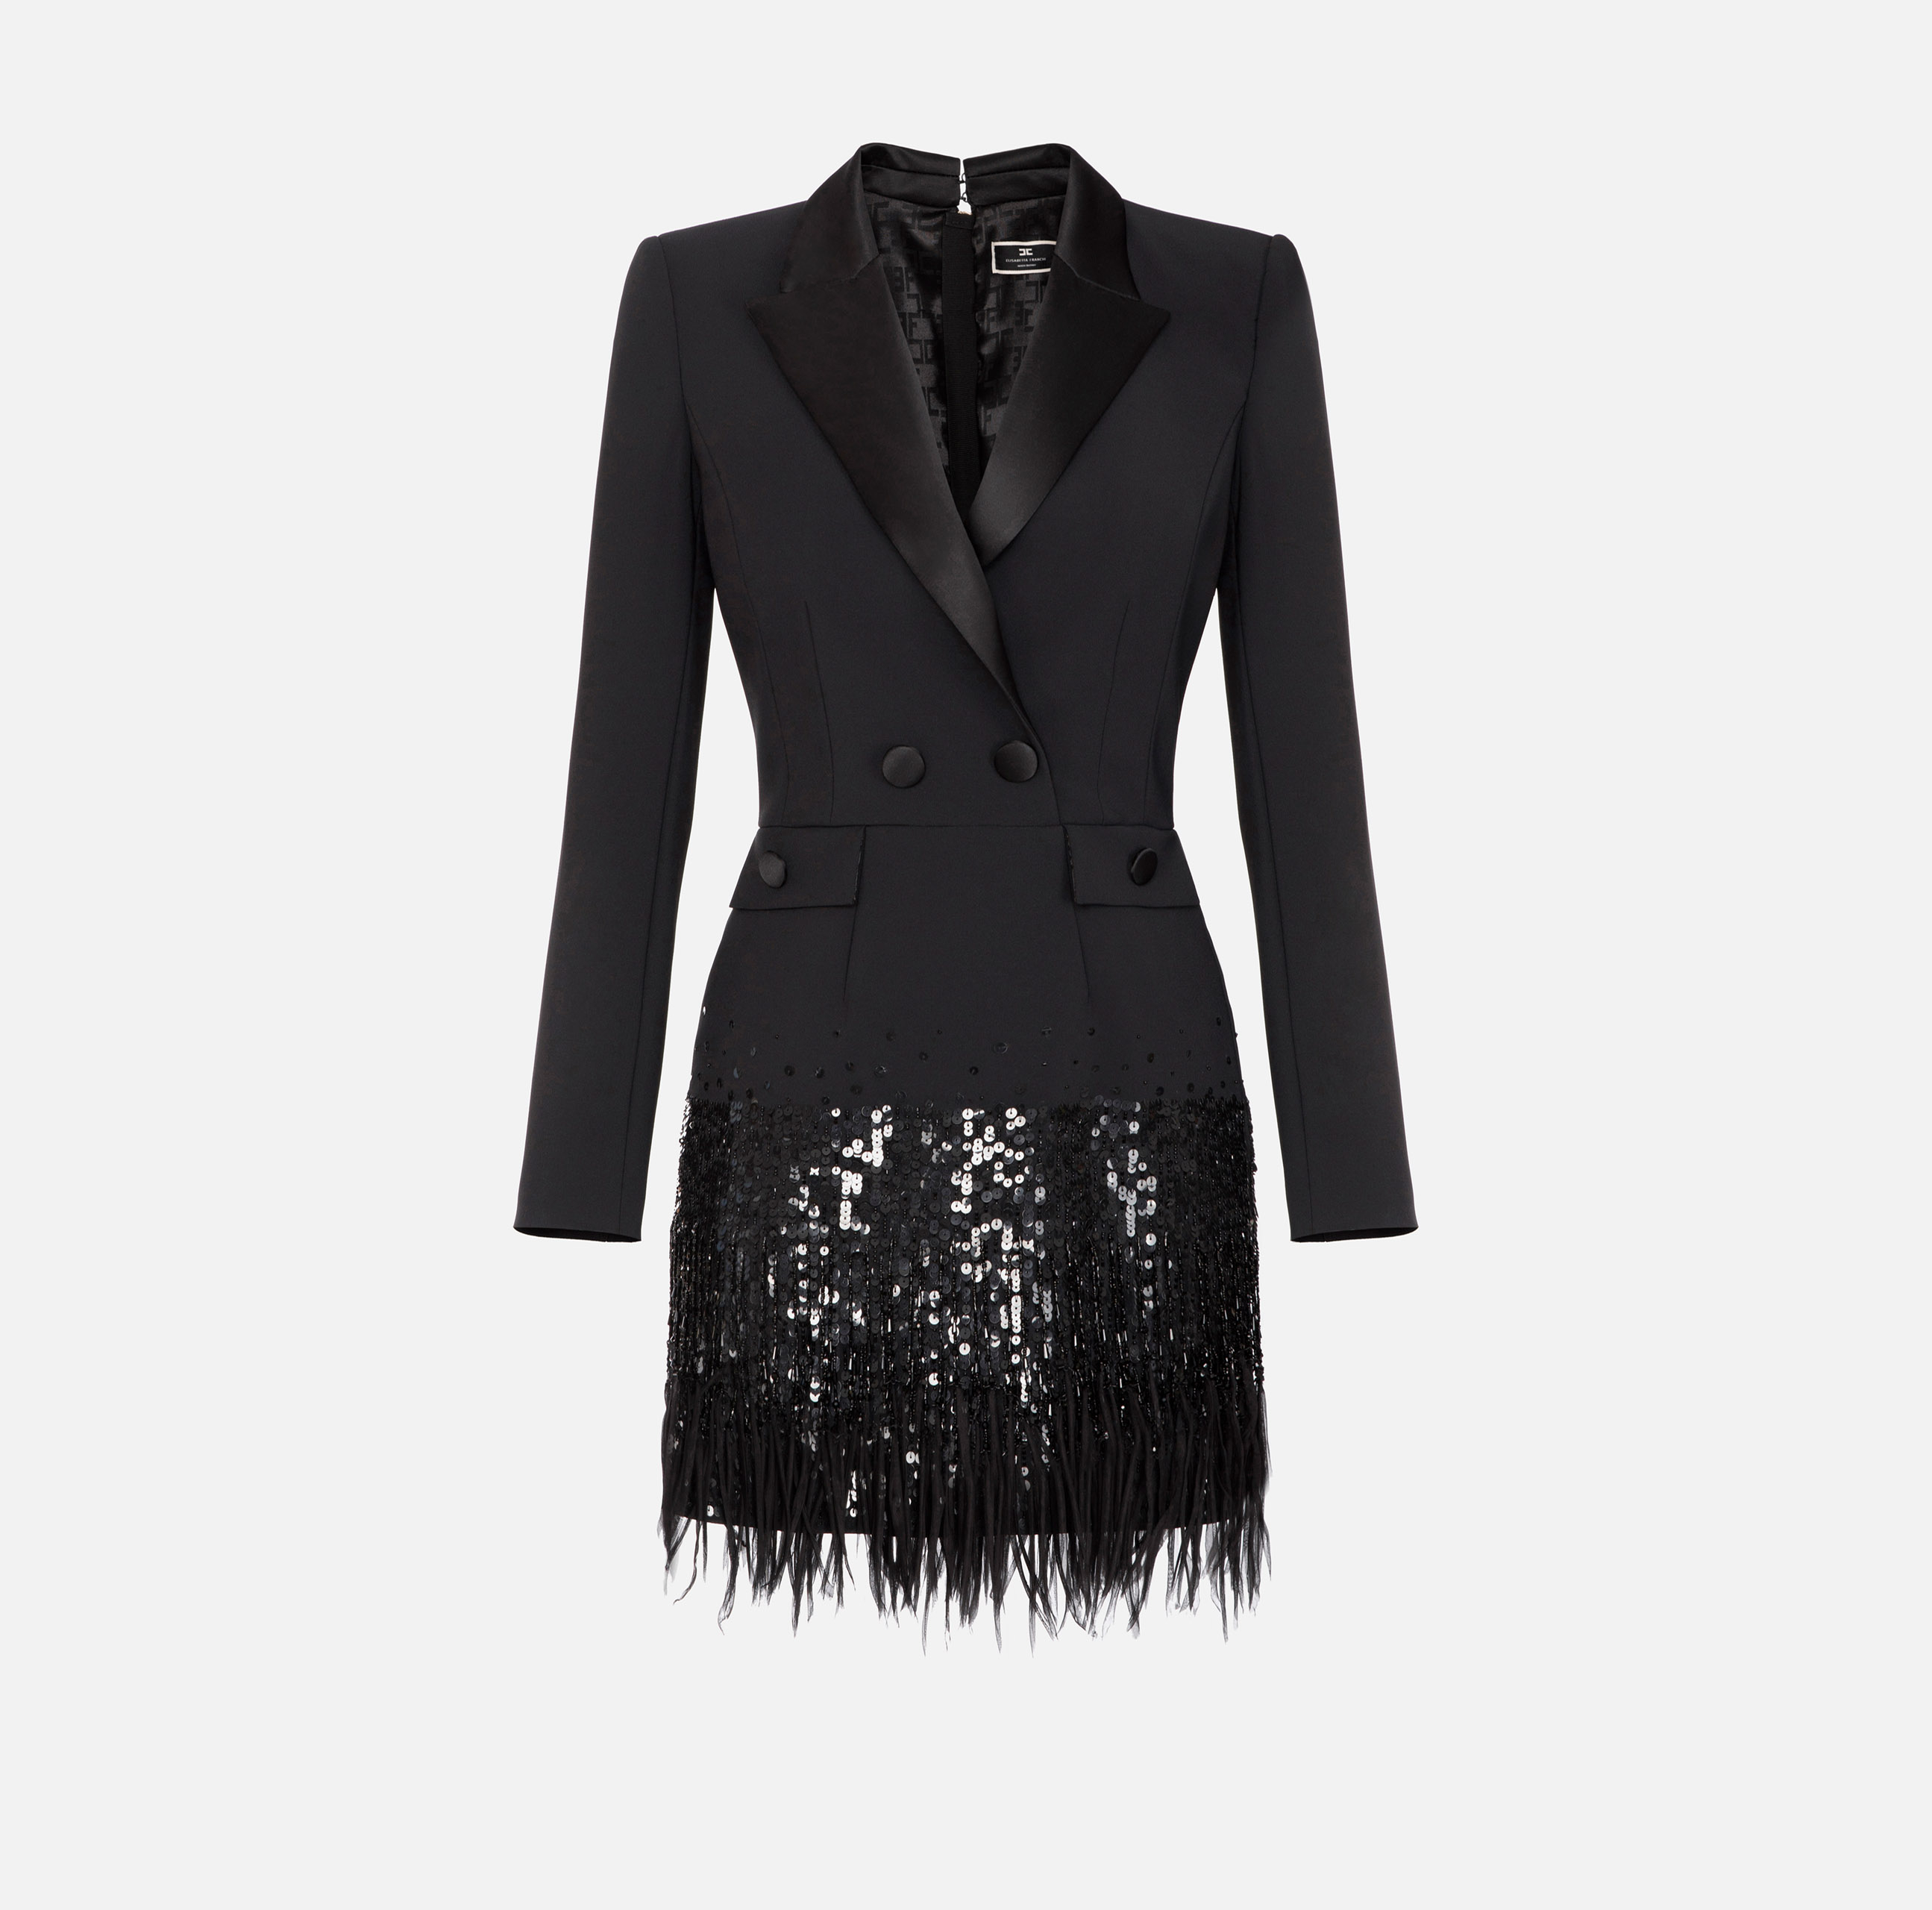 Coat dress in double layer crêpe fabric with sequins and fringes - ABBIGLIAMENTO - Elisabetta Franchi